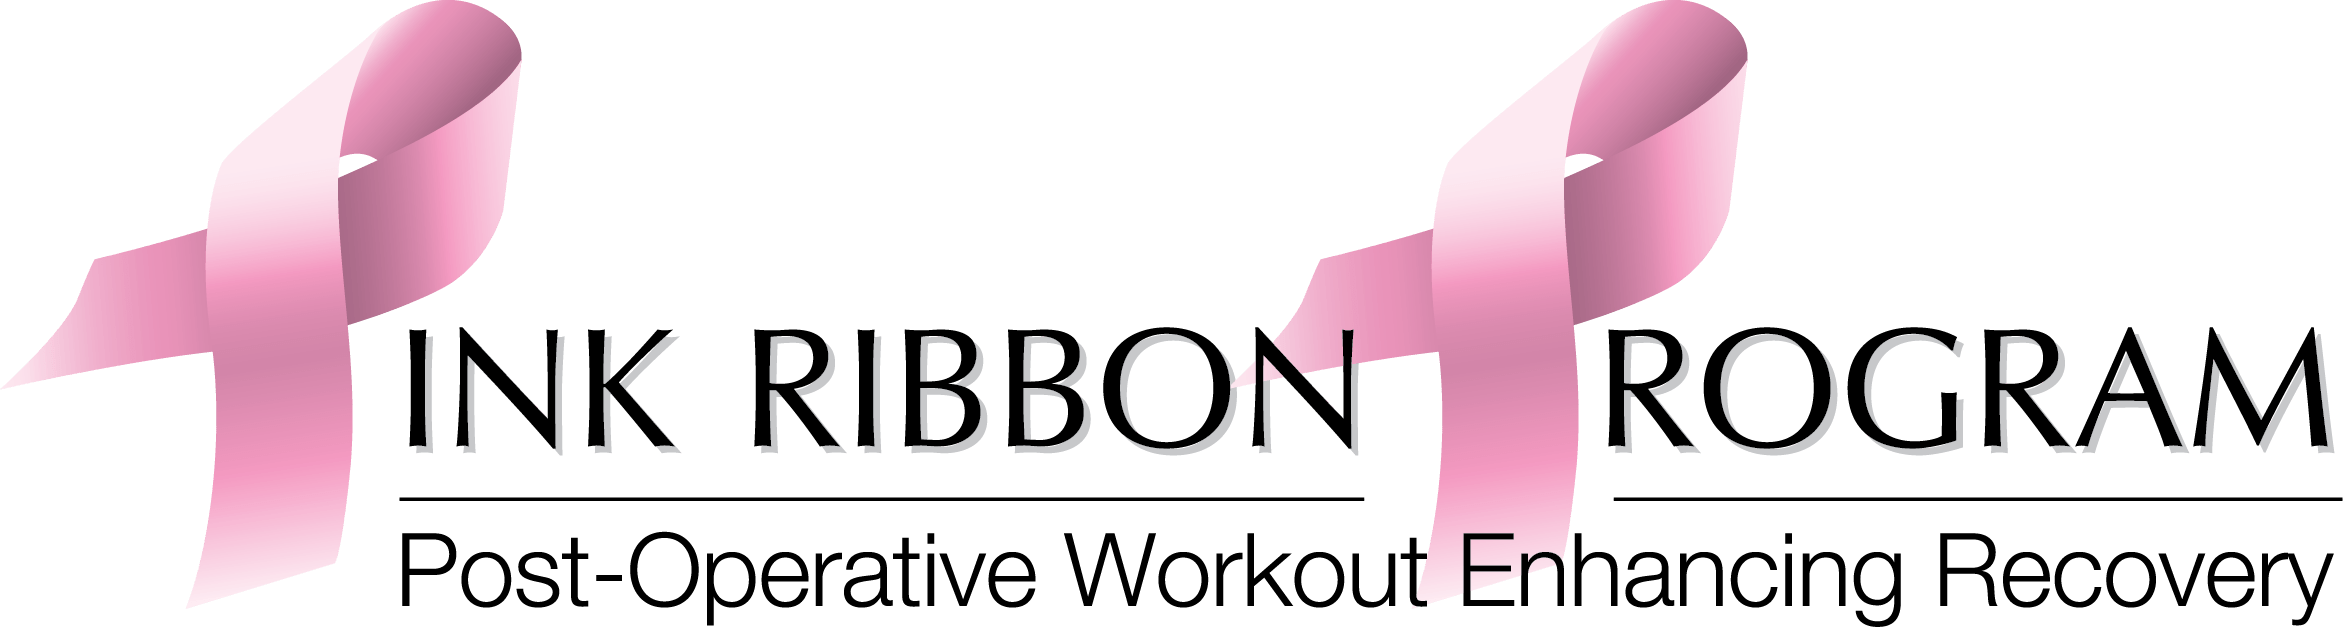 Reserve Your Spot Today - Pink Ribbon Program (2343x627), Png Download